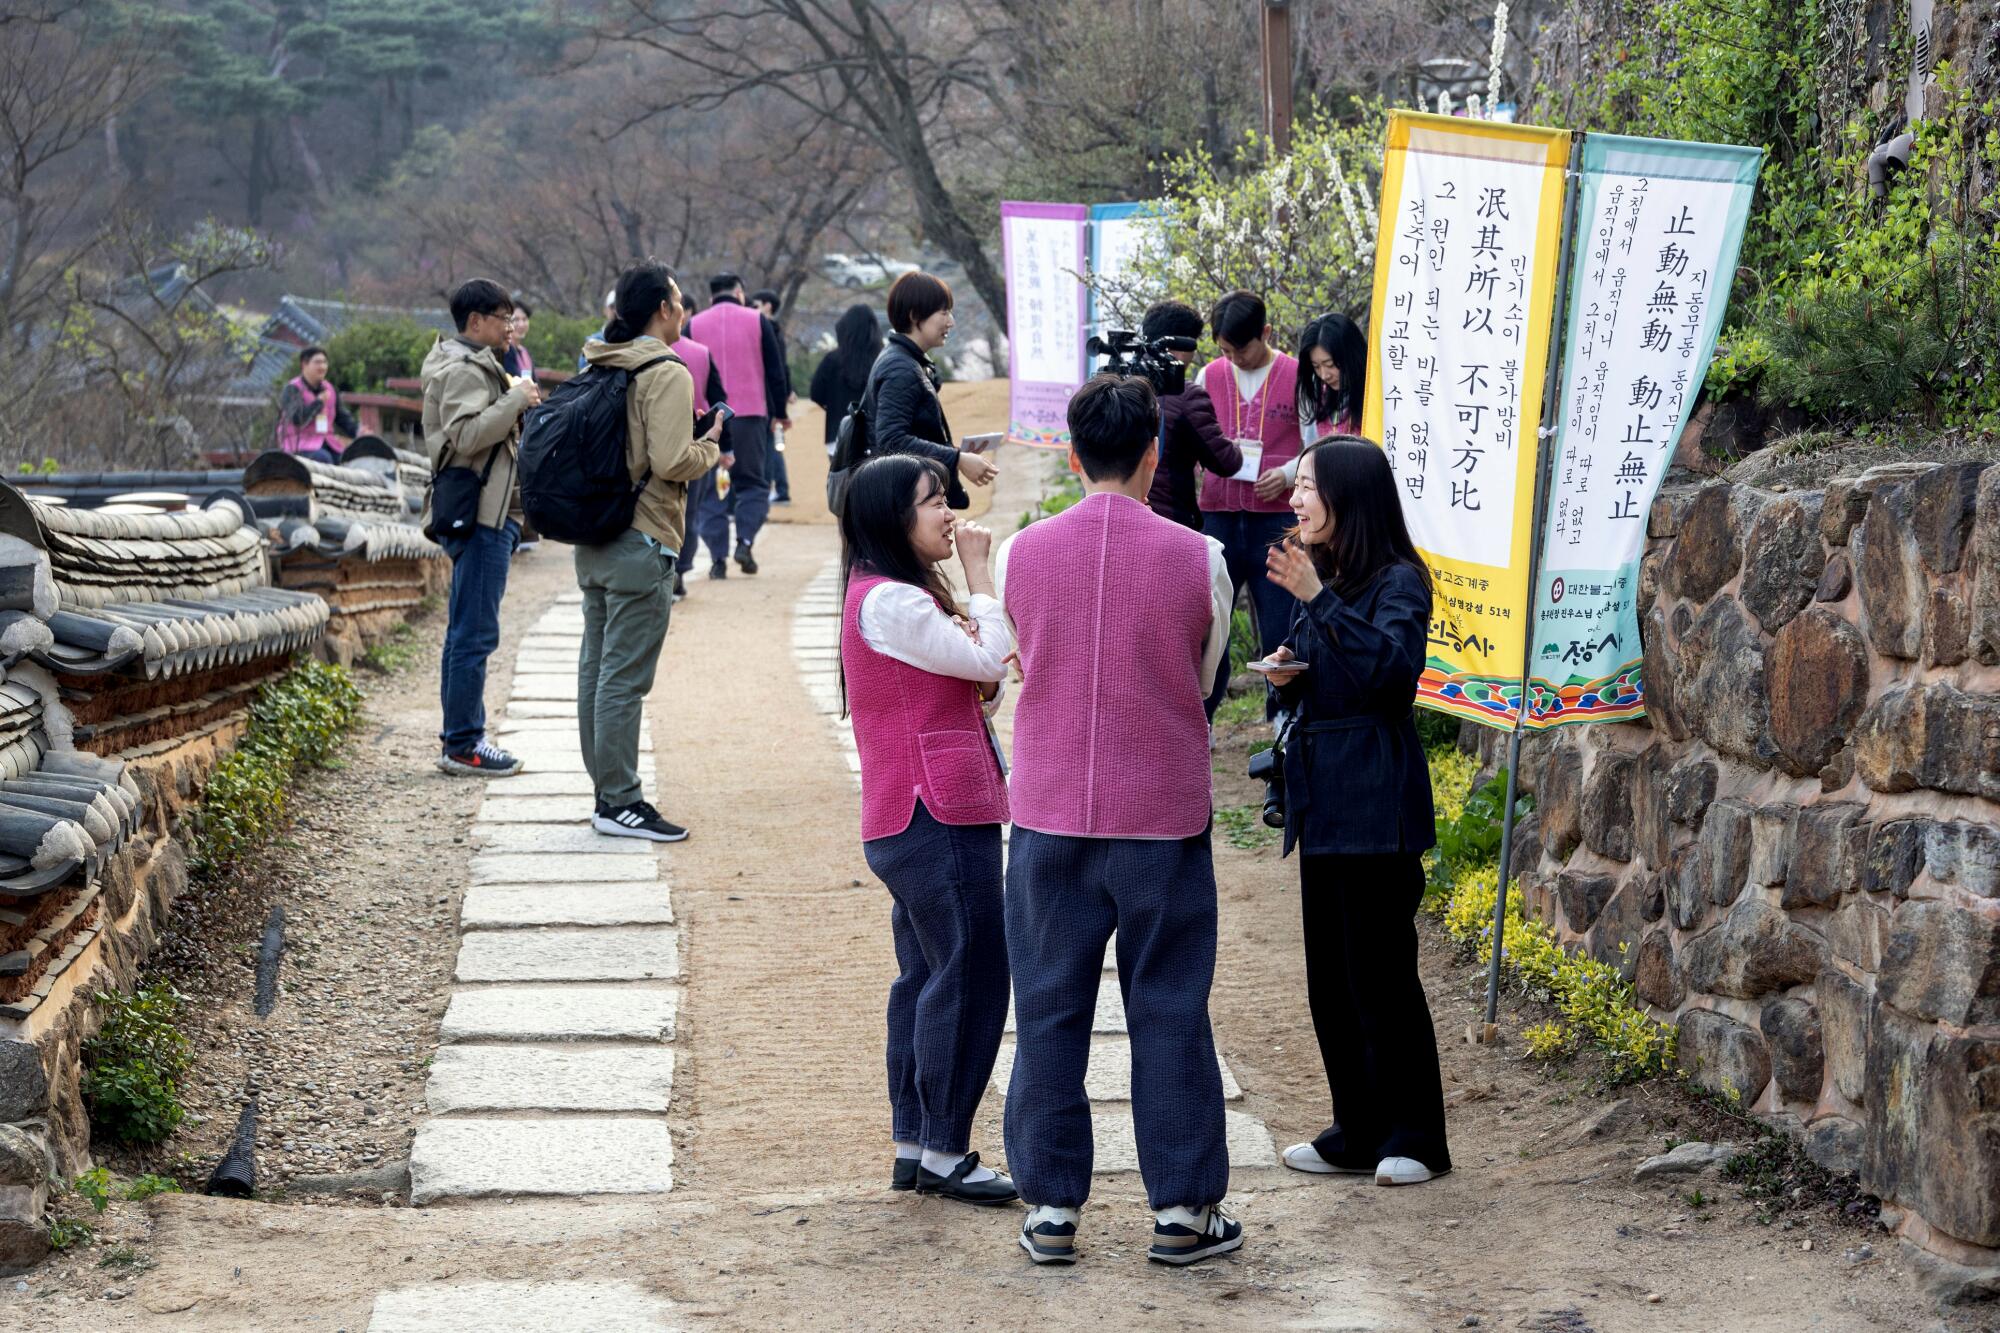 People stand talking near a stone wall and banners in an outdoor setting